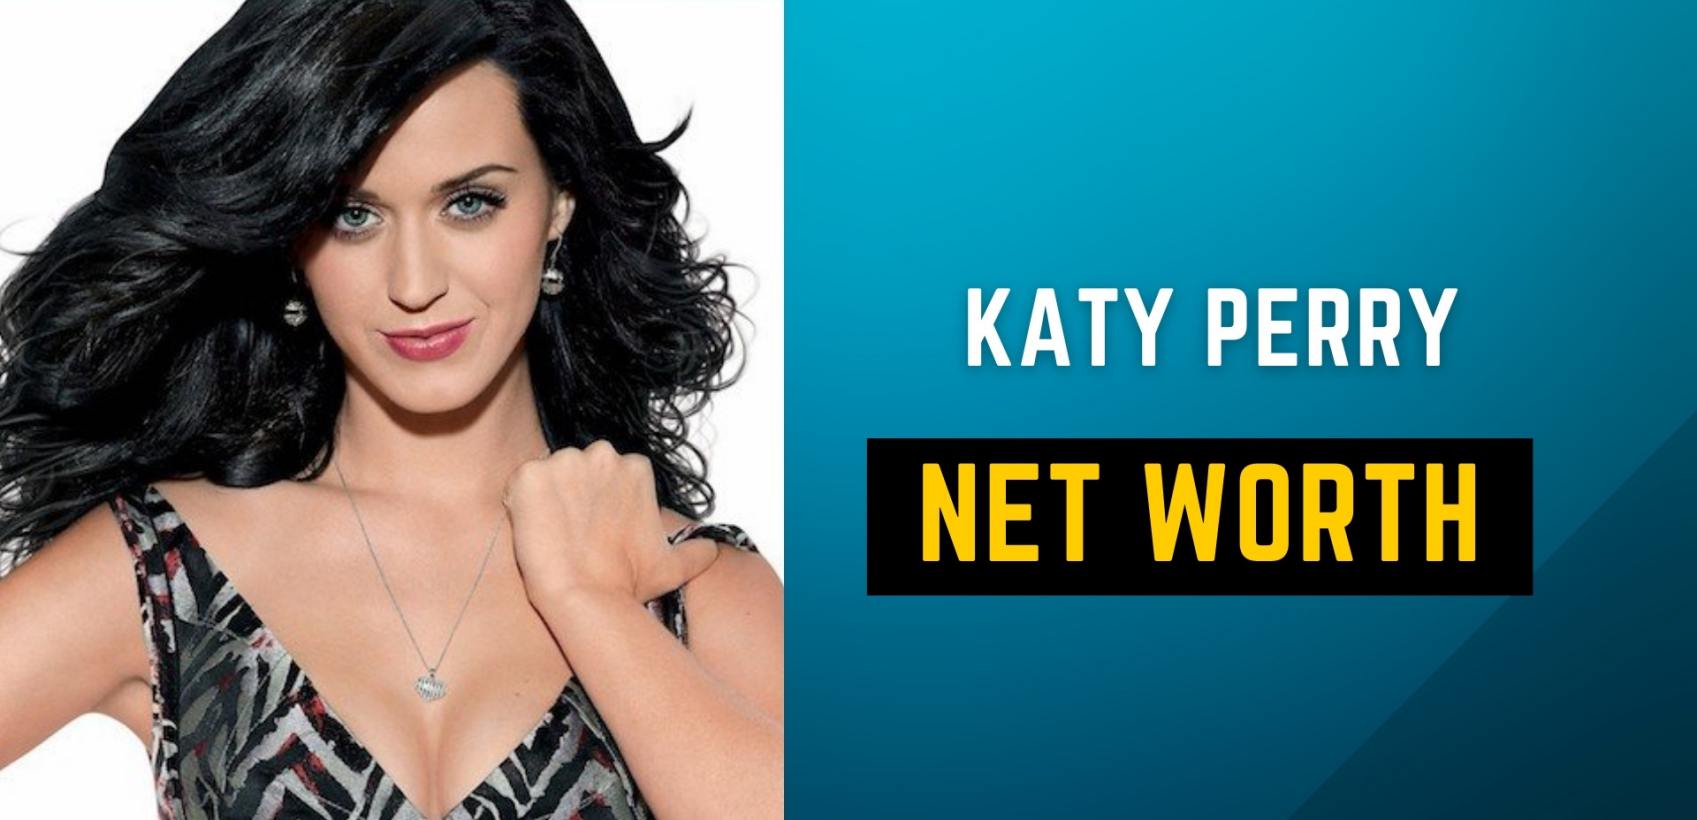 American Singer and Songwriter Katy Perry Net Worth (2022 Updated): Did Katy Perry grow up rich?